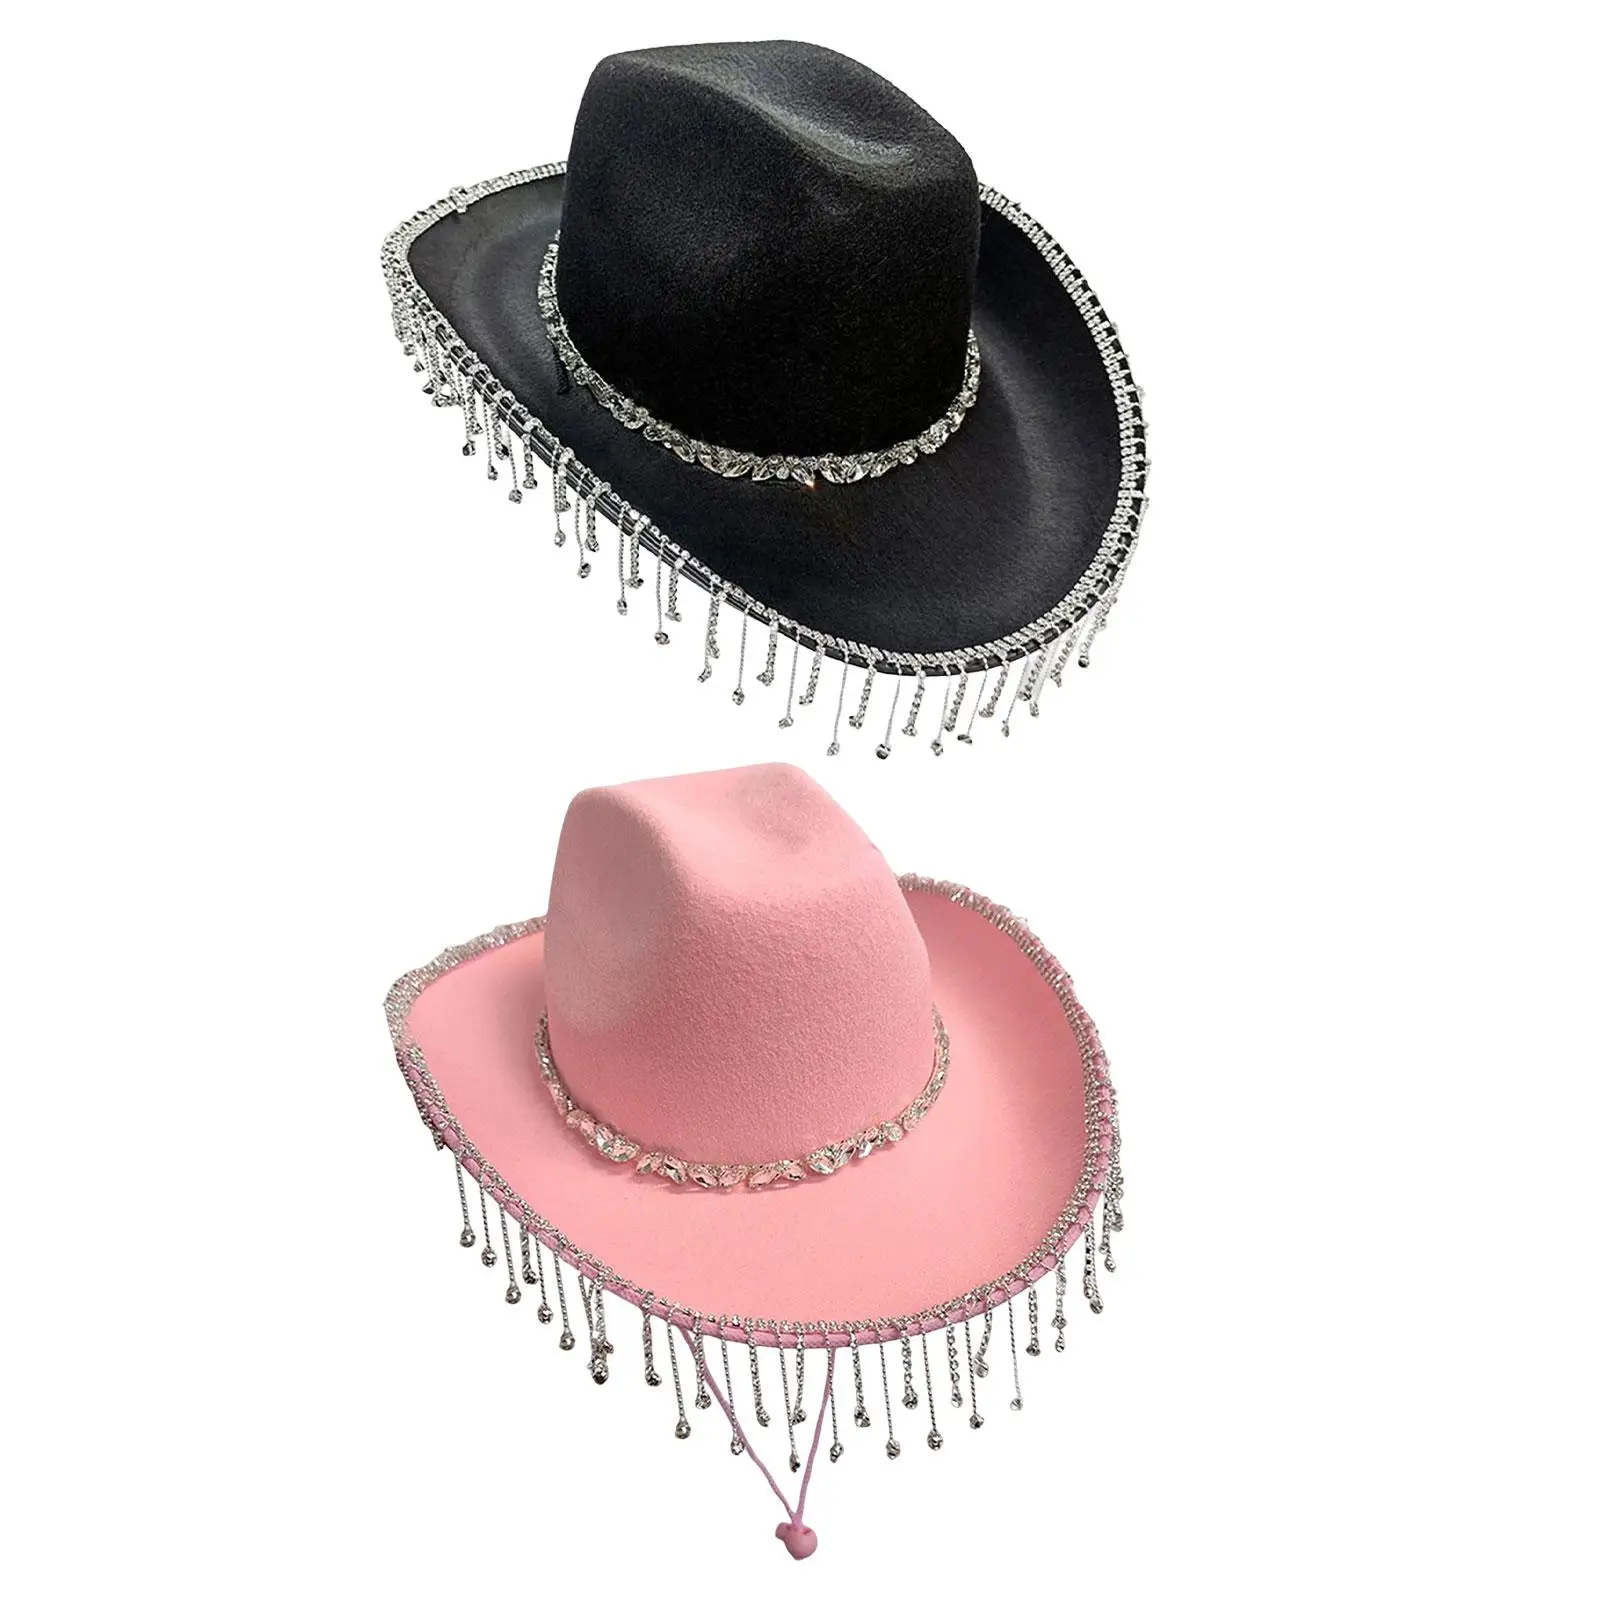 Western Cowboy Hat Photo Props Beach Sunshade Events Summer Travel Bridal Engagement Party Teens Outdoor Wide Brim Hat Disco Hat